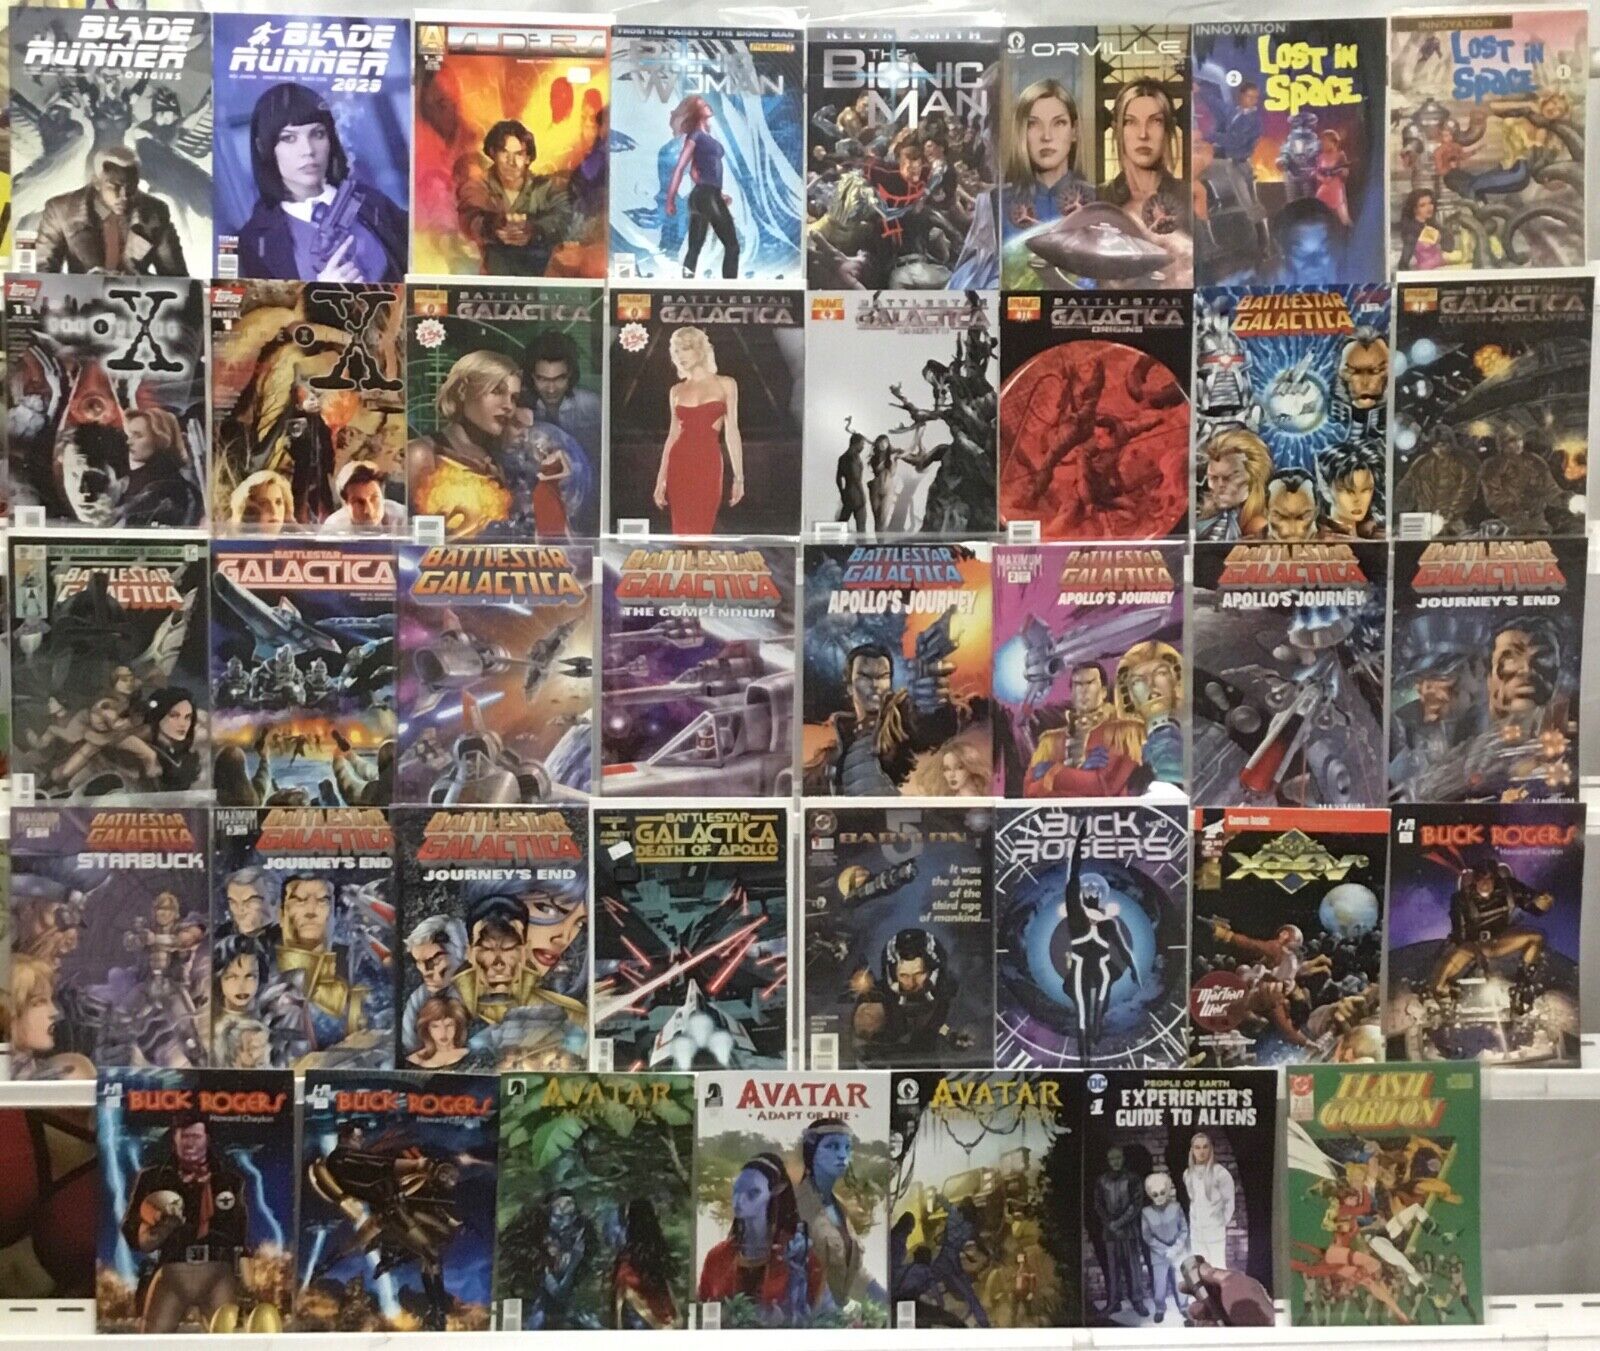 Sci-Fi TV/Movie Comic Book Lot of 39 Issues - Avatar, Blade Runner, Galactica